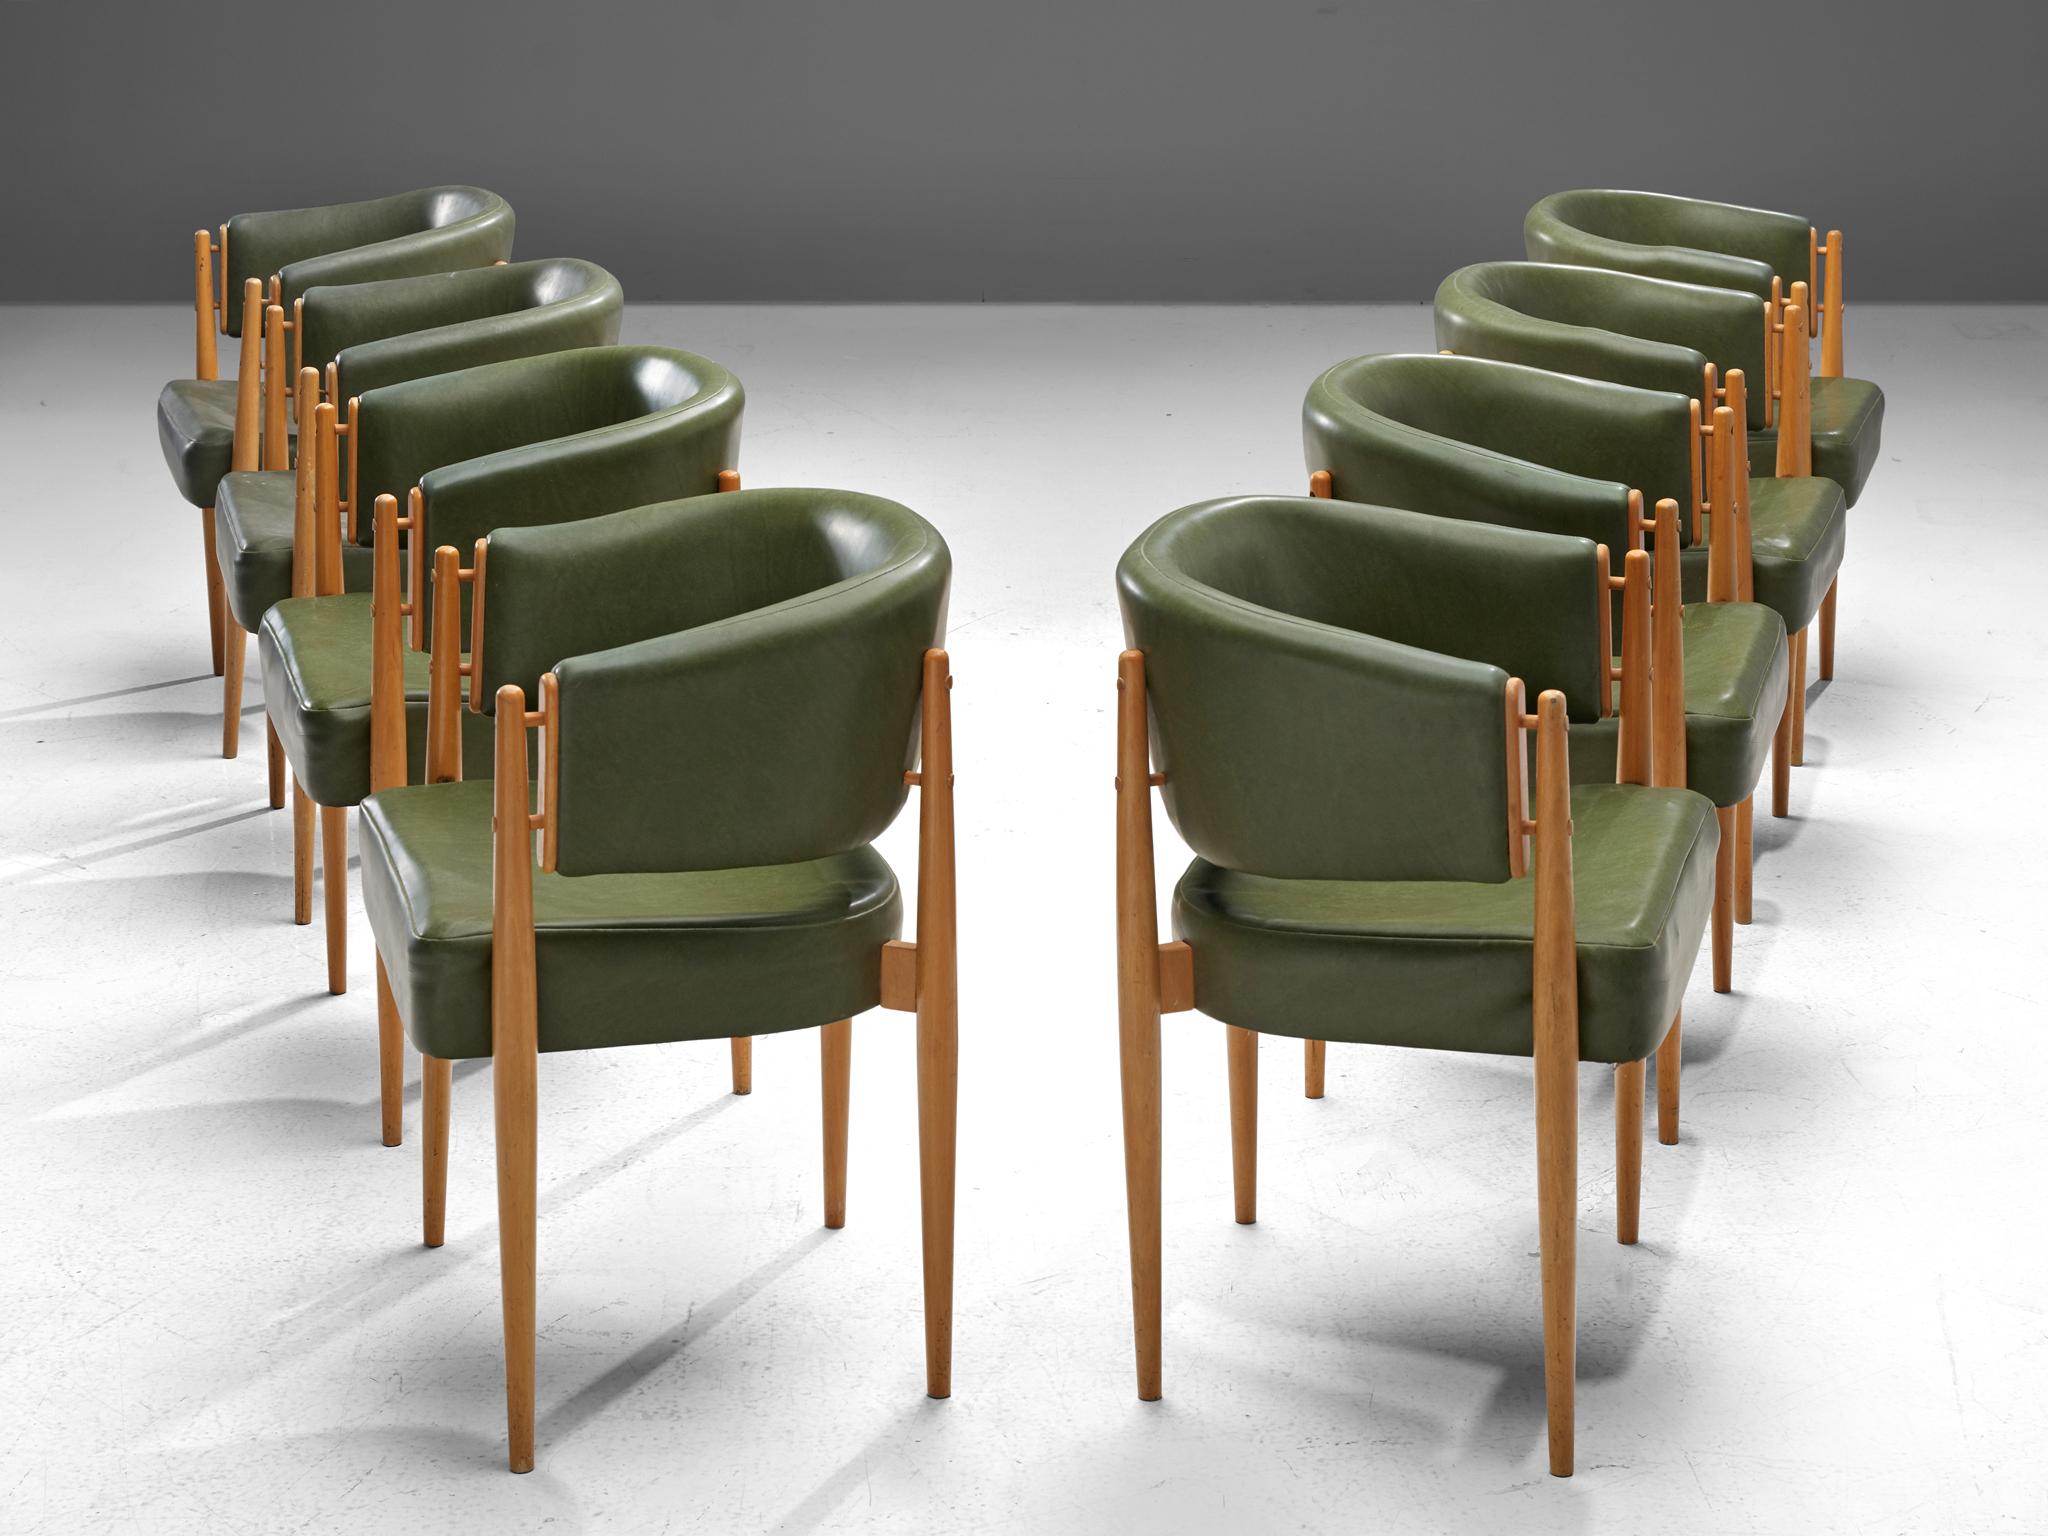 Set of 8 dining chairs, beech and leatherette, France, 1960s

Elegant set of 8 dining chairs with a rounded backrest that surround the sitter, creating a comfortable and embracing feeling. The beech legs are tapered and run up all the way to the